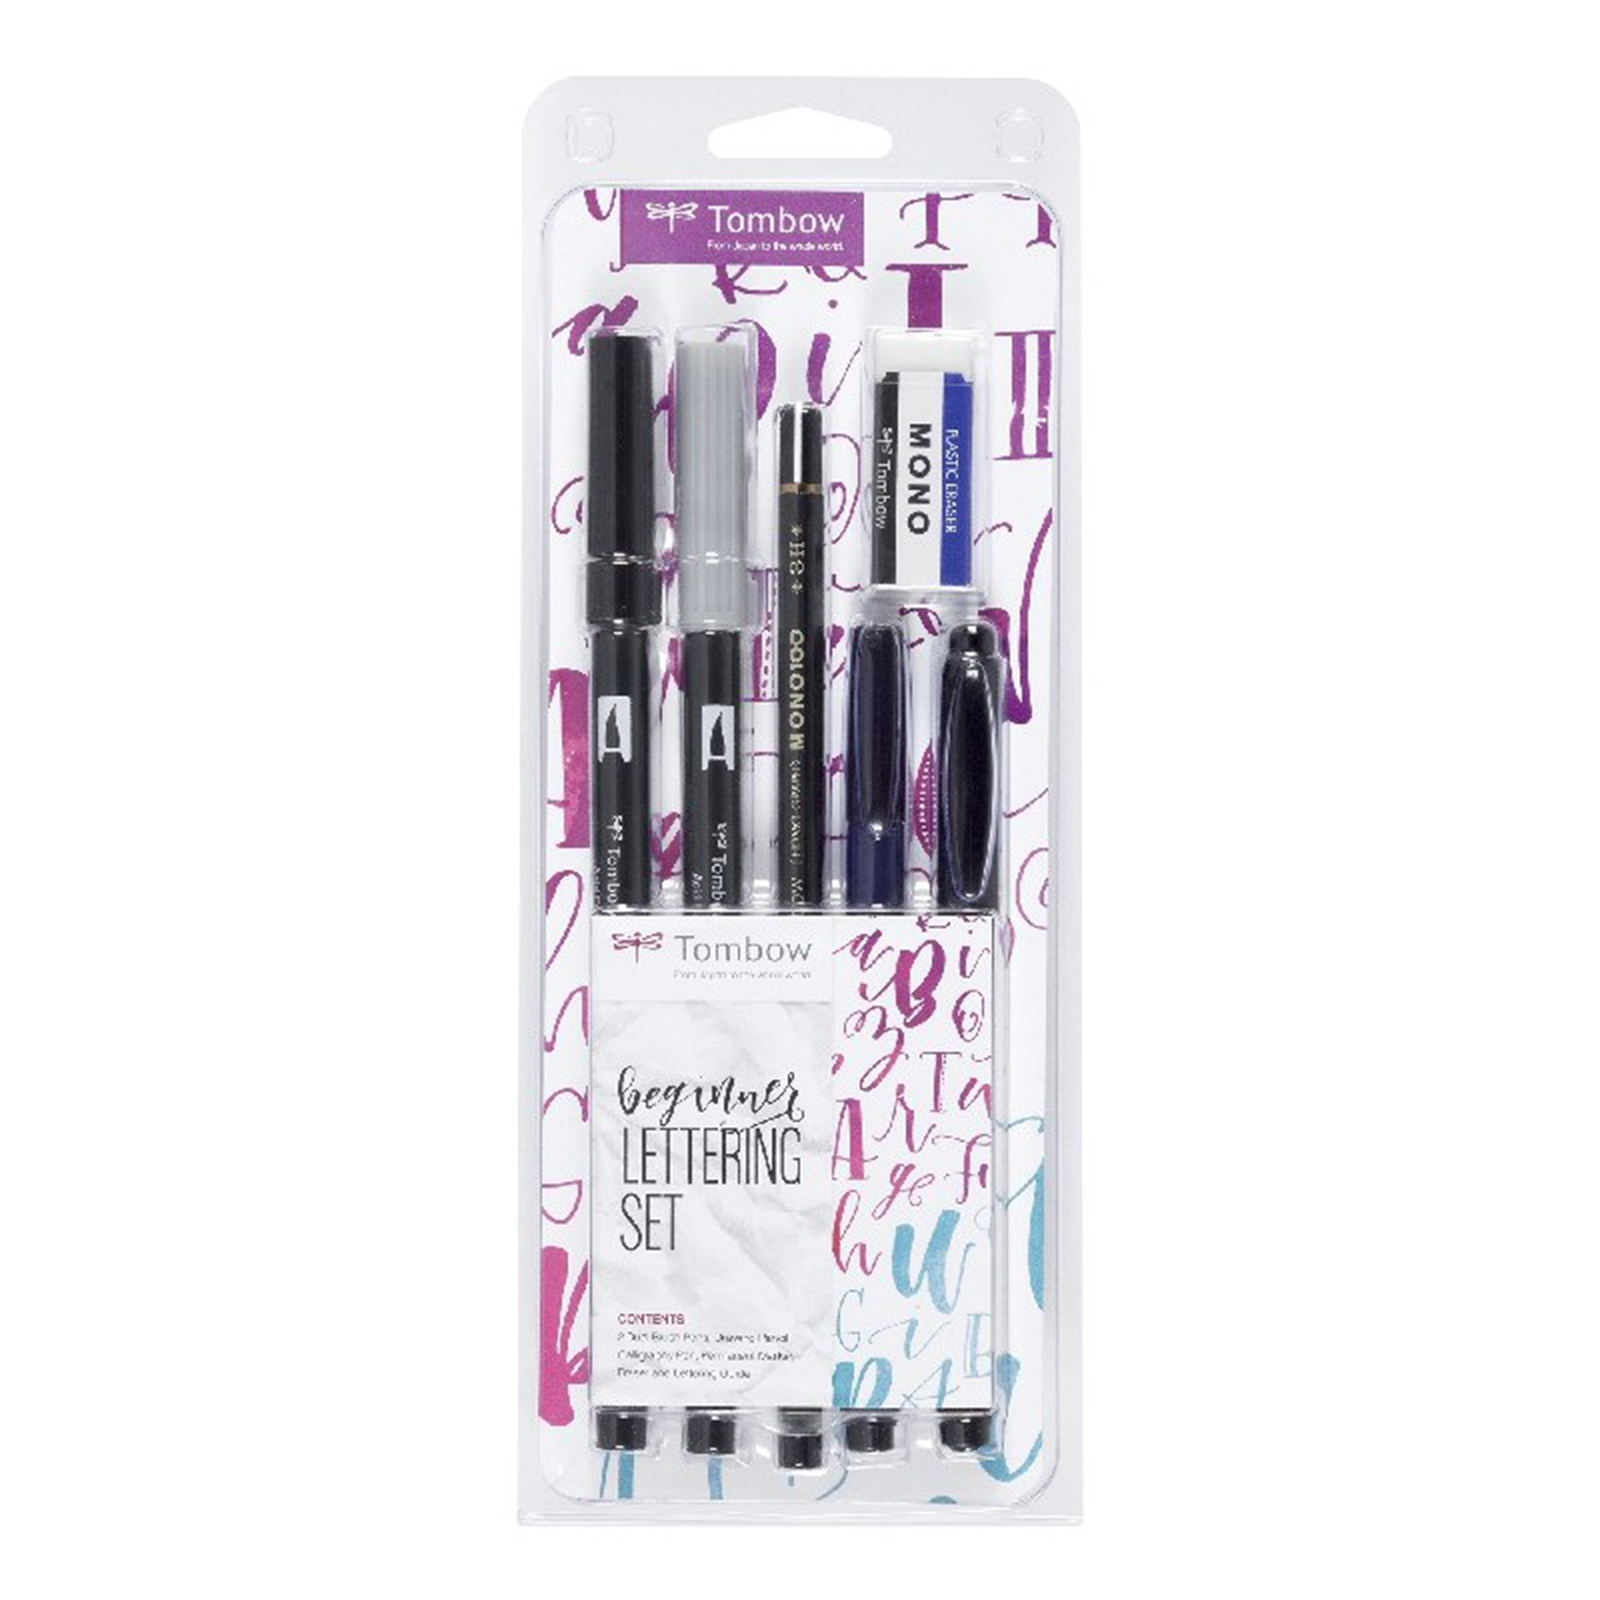 Tombow Advanced Lettering Set